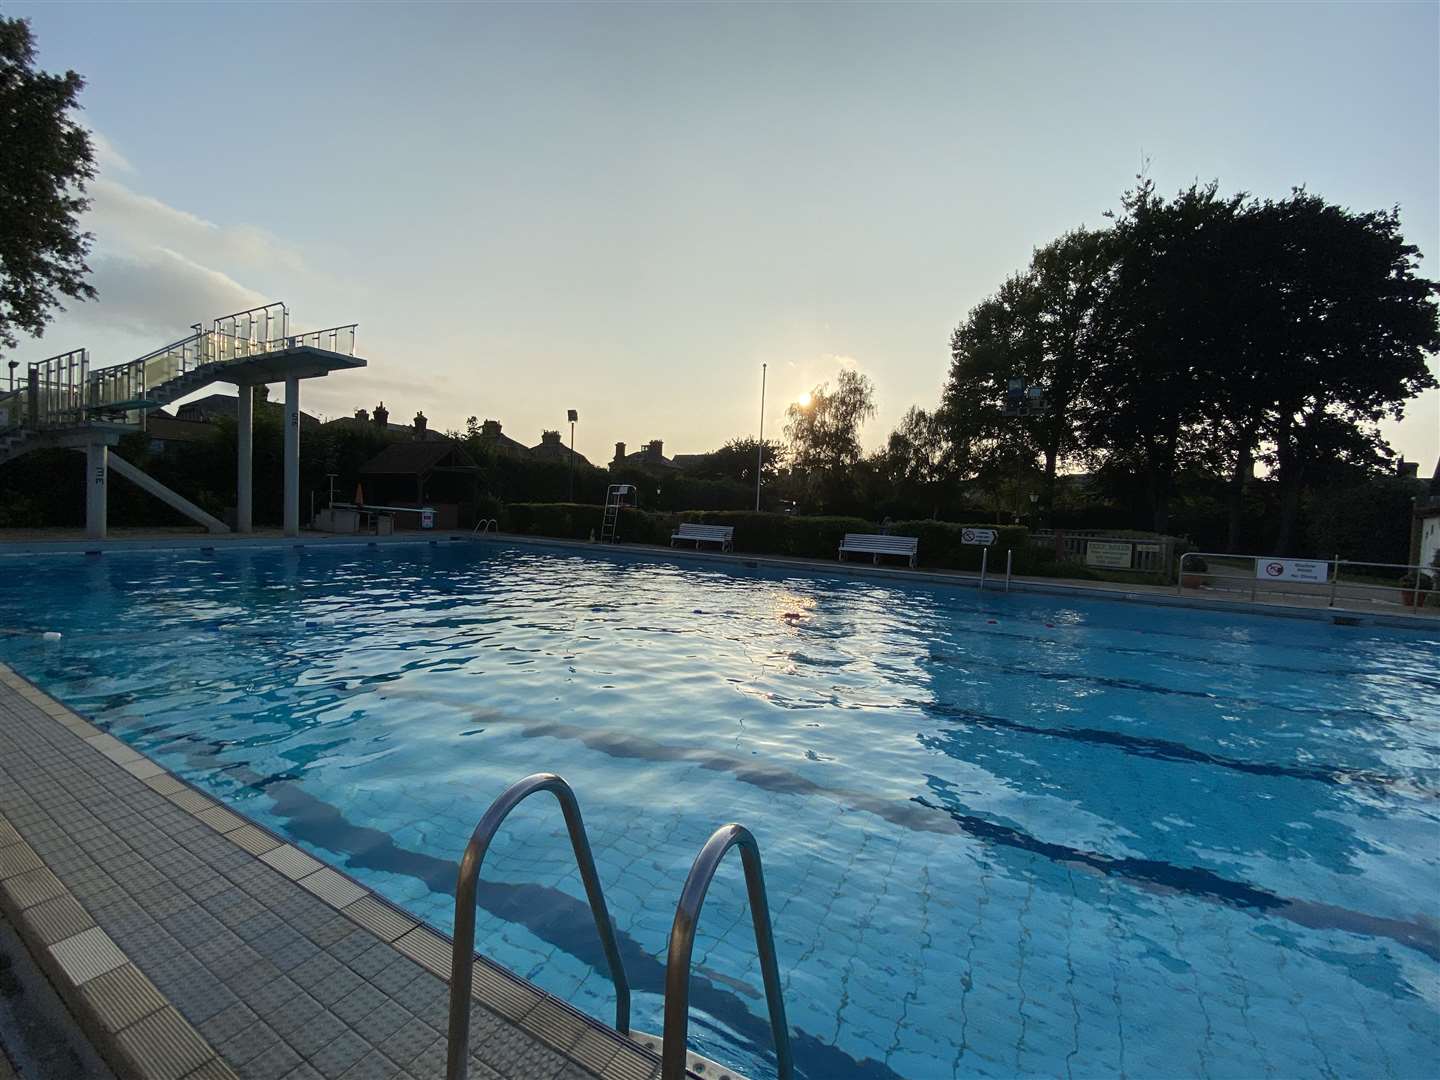 People will now be able to swim year-round in Faversham Pools' heated lido. Picture: Faversham Pools